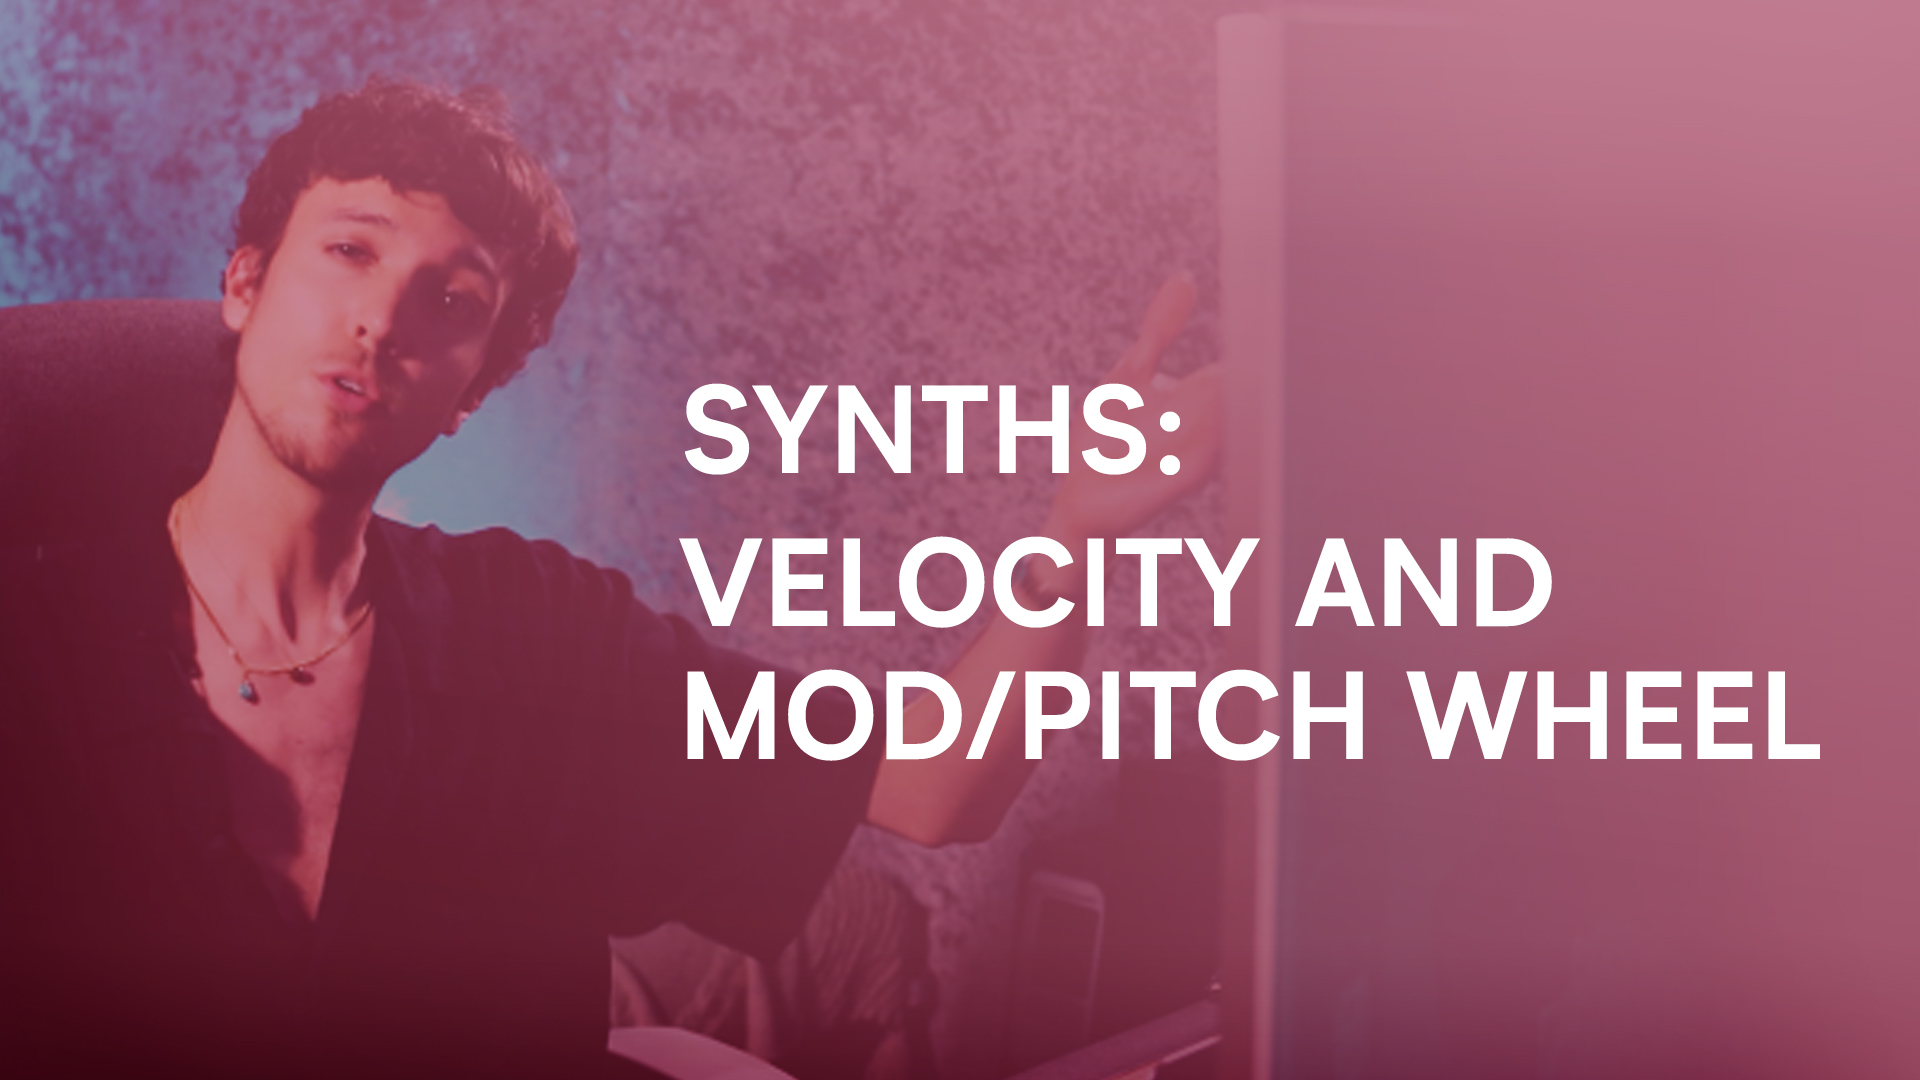 VELOCITY AND MOD PITCH WHEEL